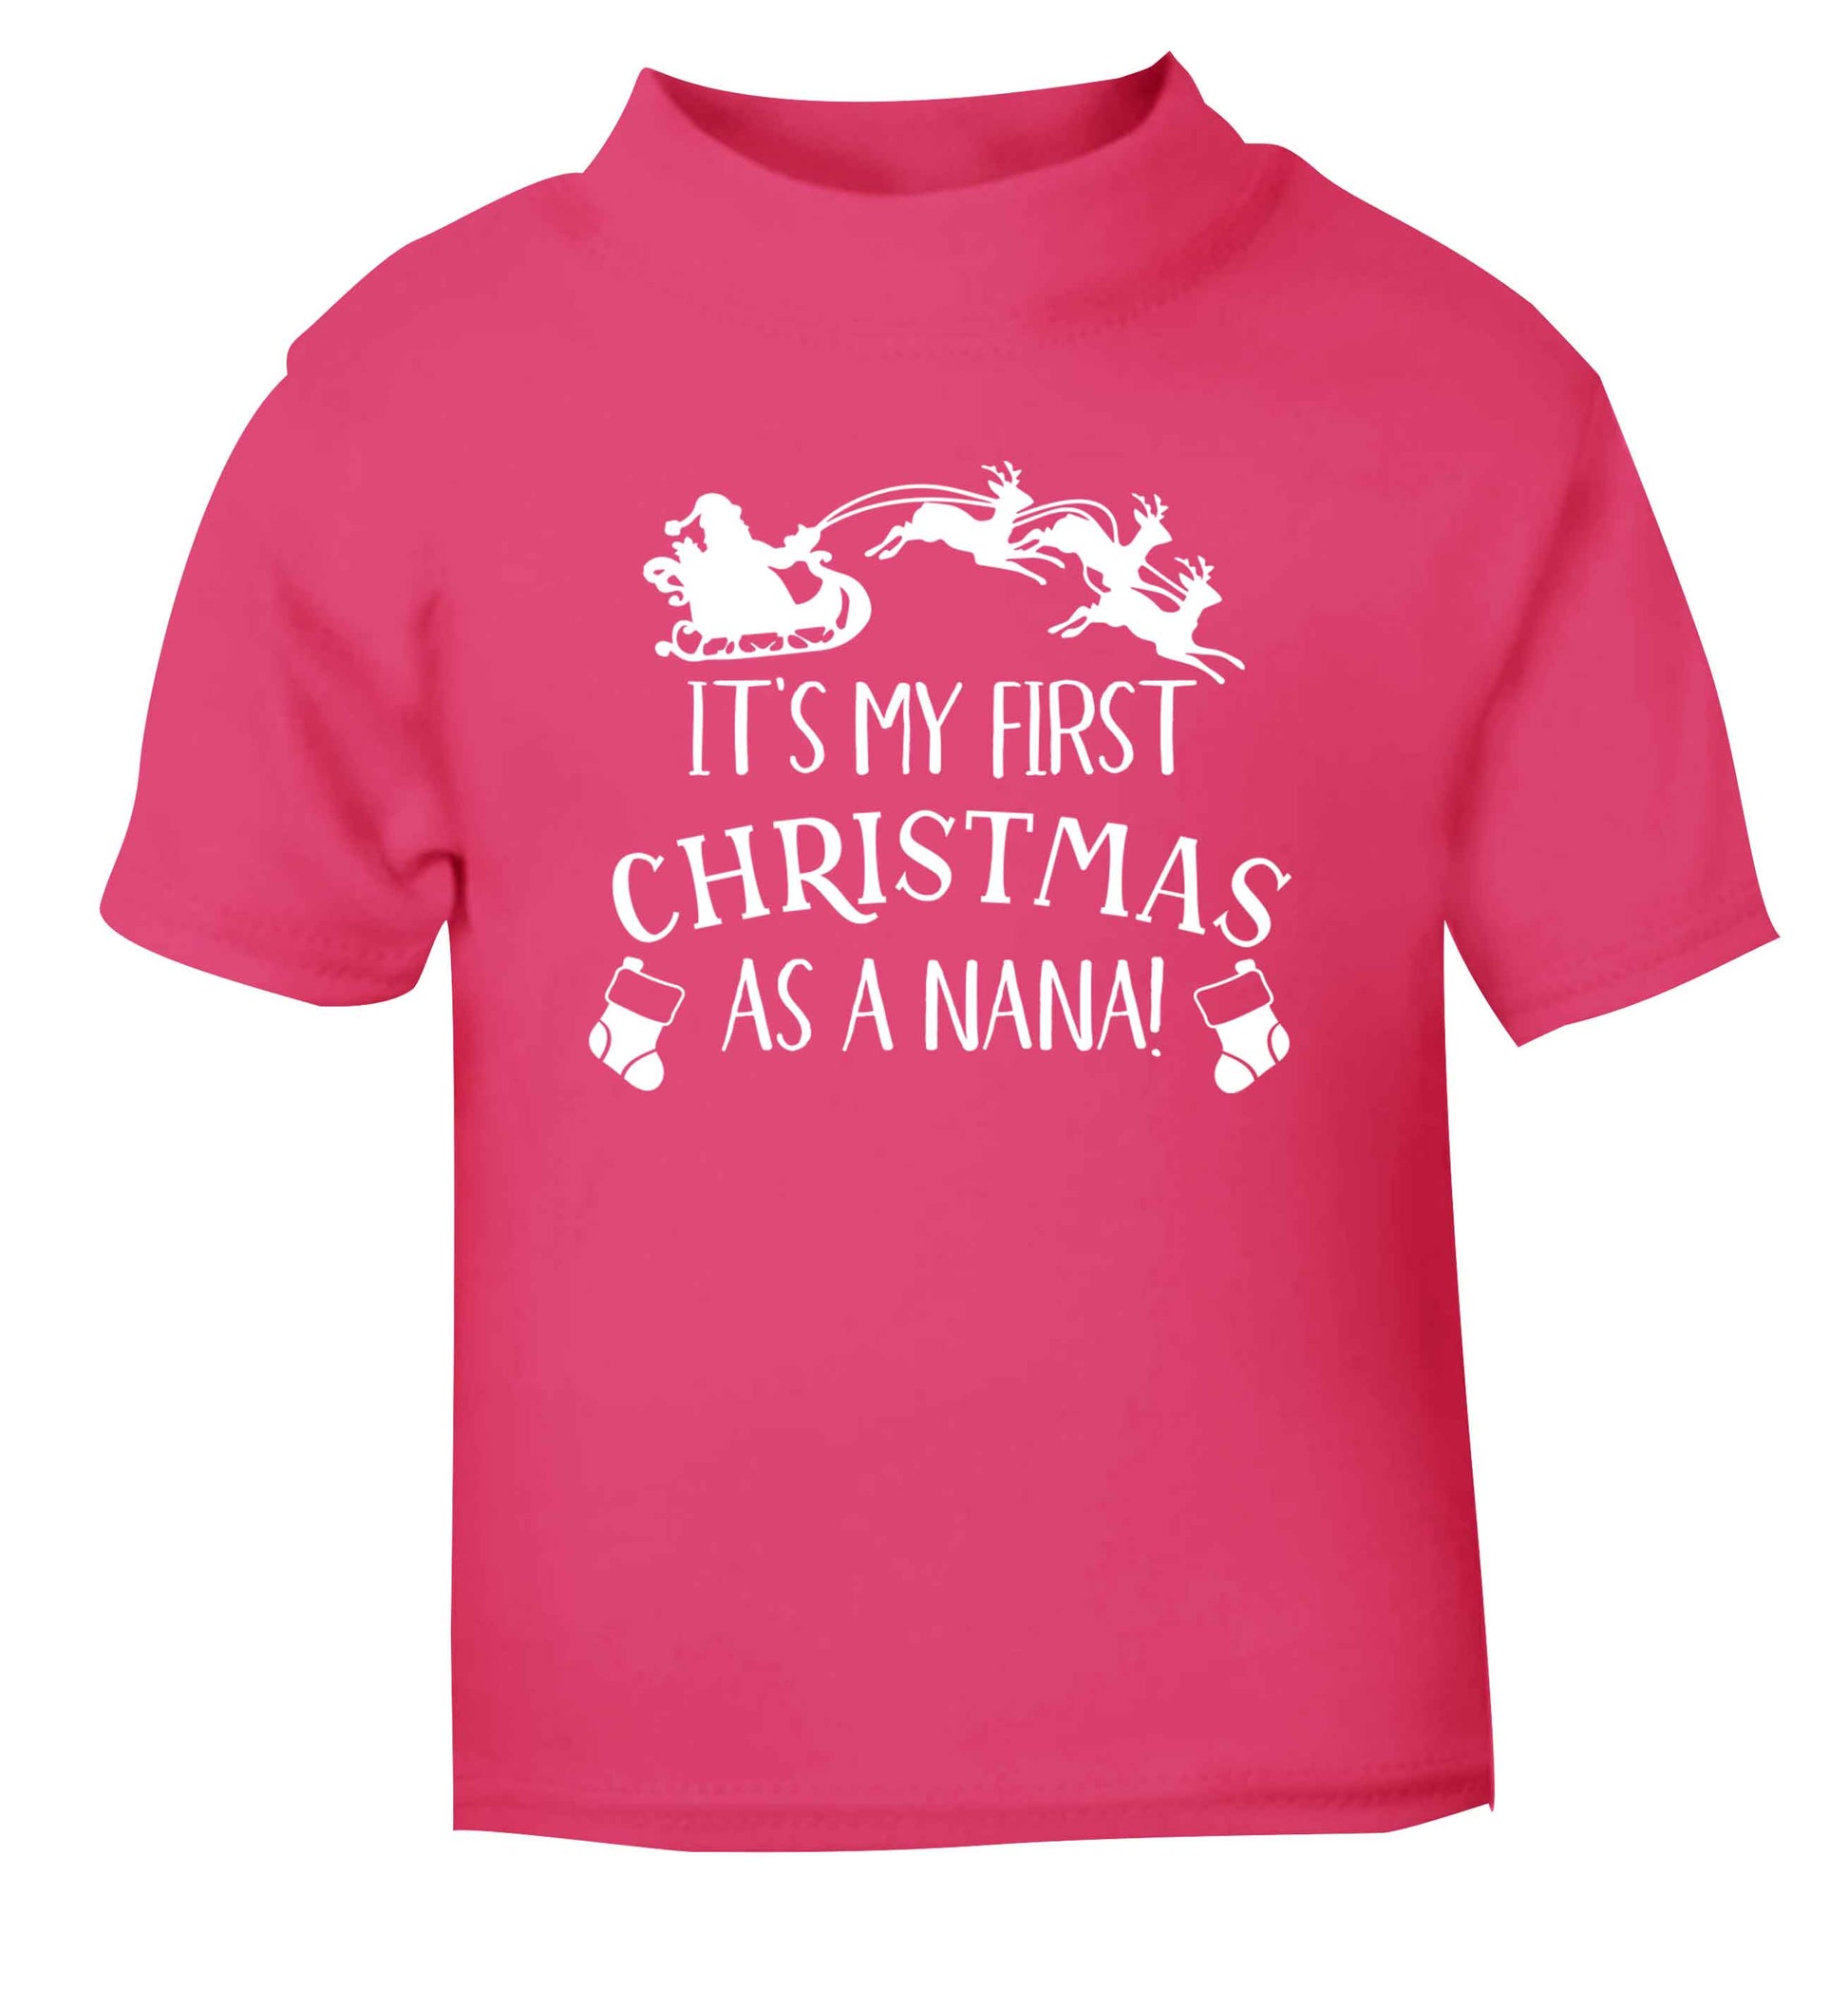 It's my first Christmas as a nana pink Baby Toddler Tshirt 2 Years